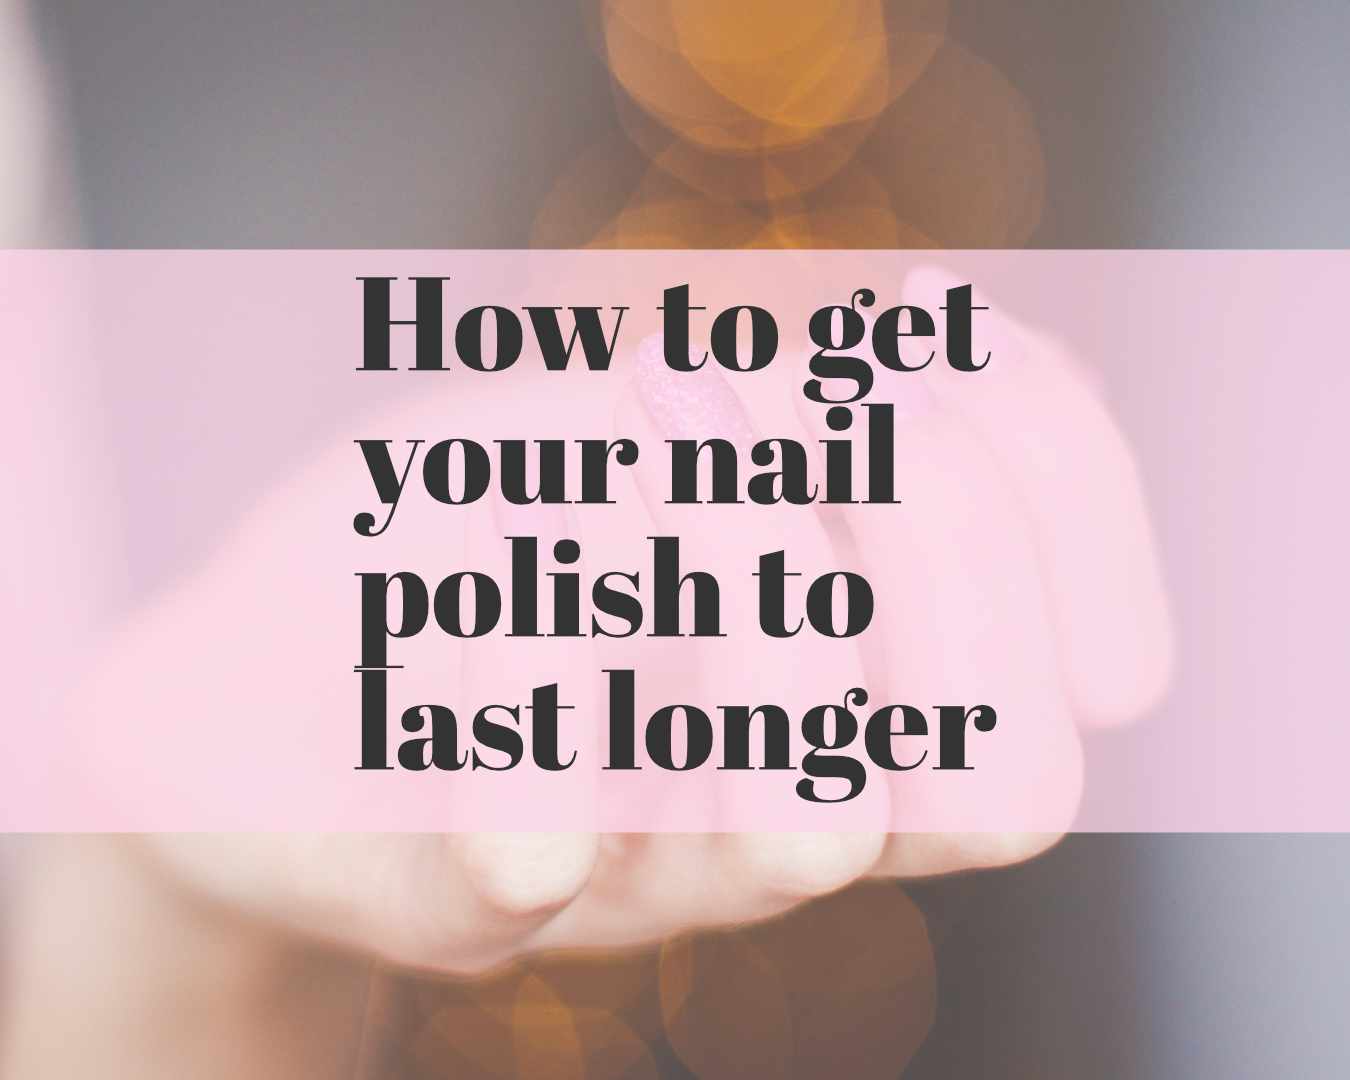 How to get your nail polish to last longer | The Nail Tech Diaries